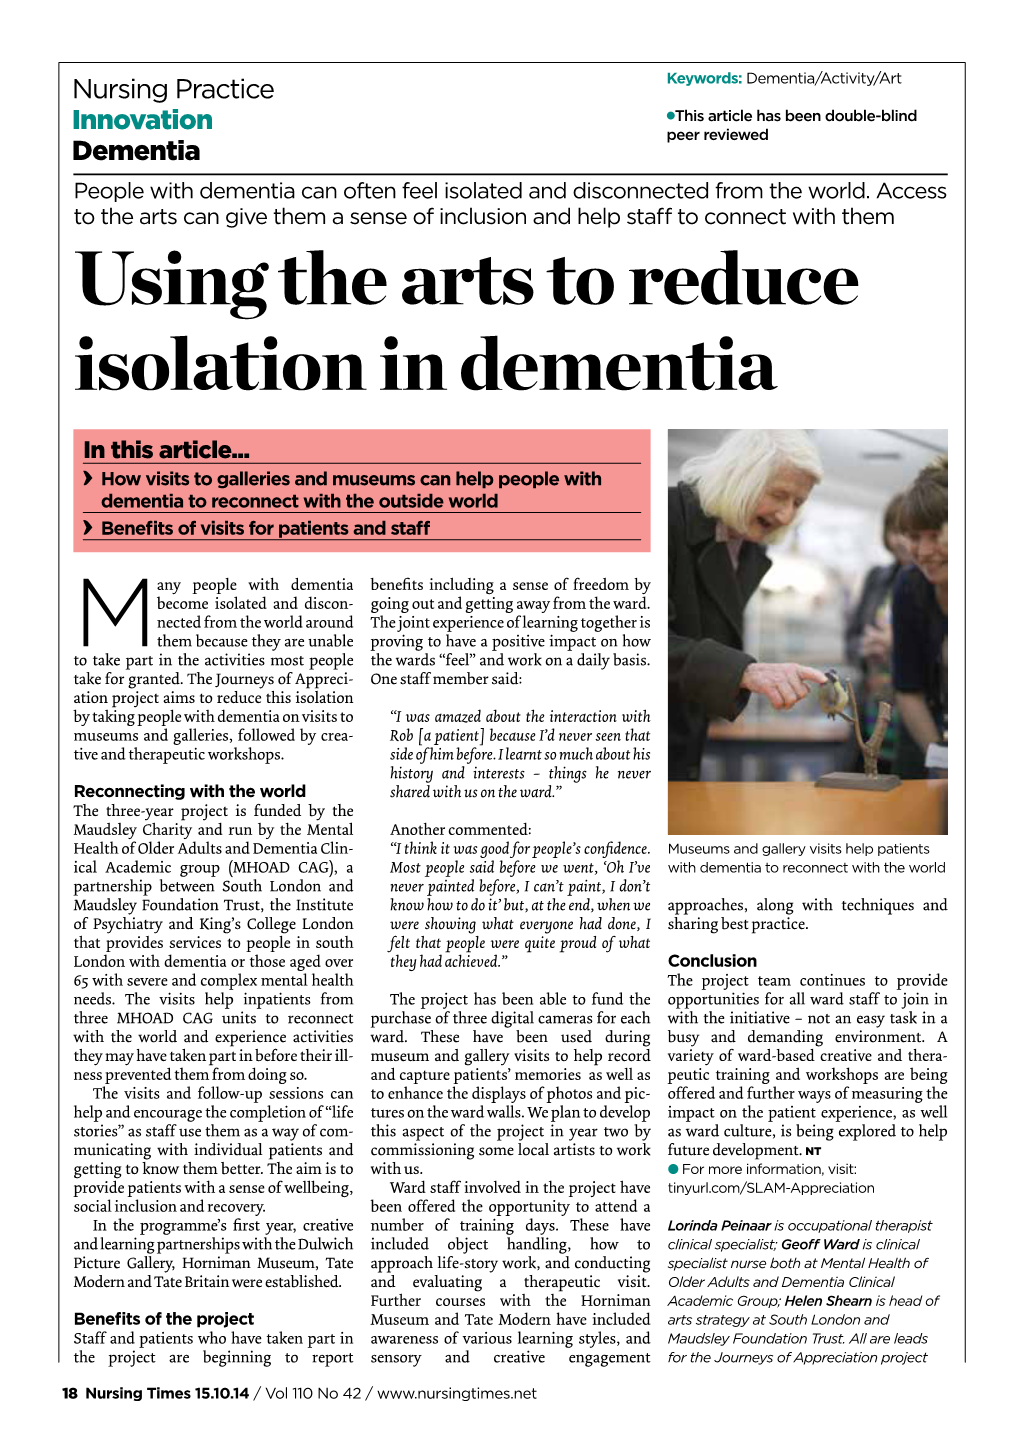 Using the Arts to Reduce Isolation in Dementia